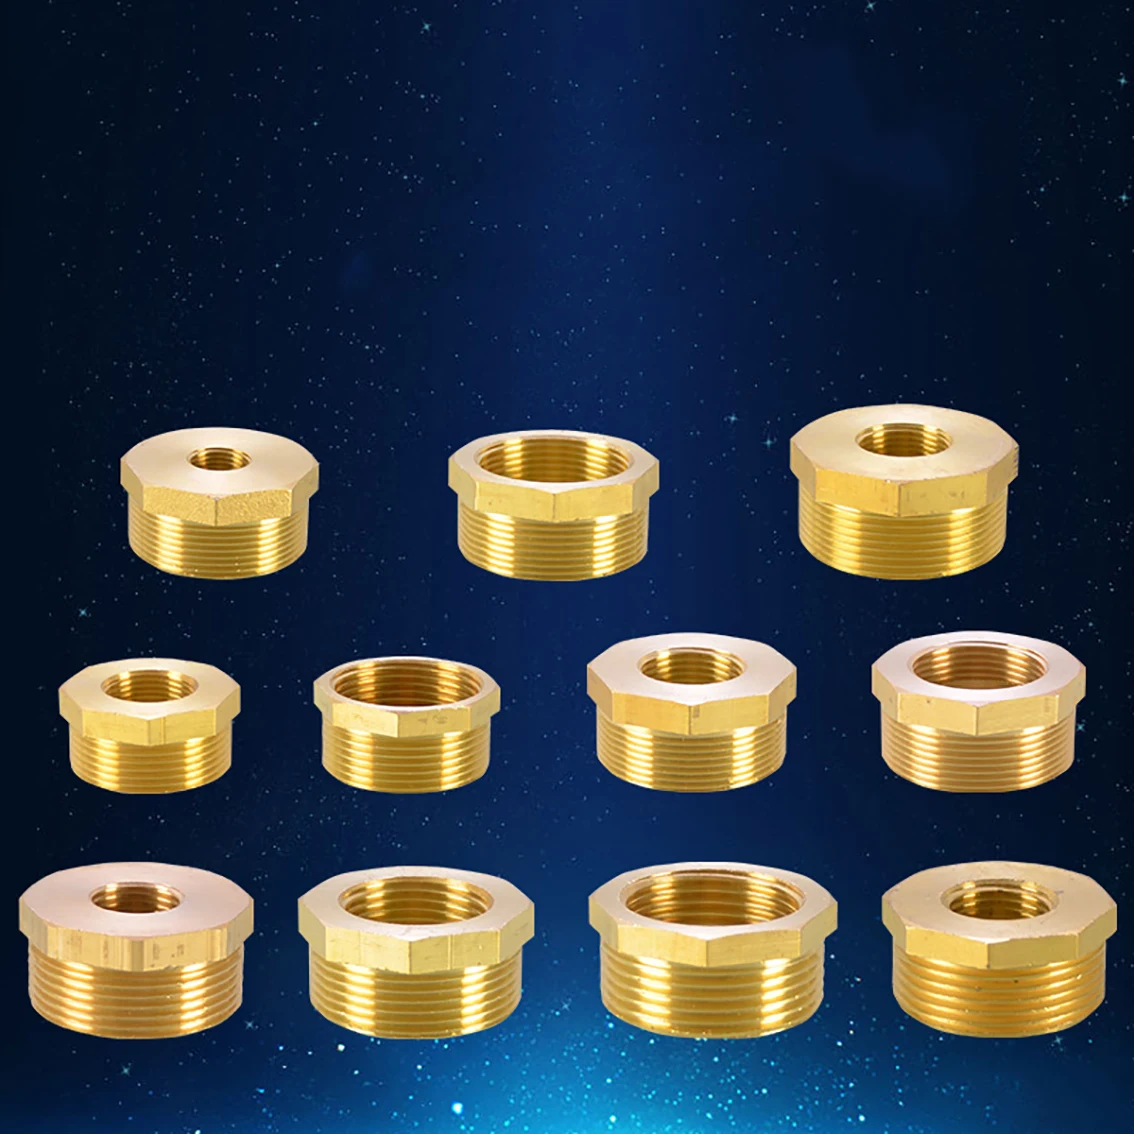 

BSP All Brass Reducer Pipe Fittings Connector 1/2" 3/4" 1" 1.2" 1.5" 2" Hexagon Water Hose Converters Couplings Tools Adapter